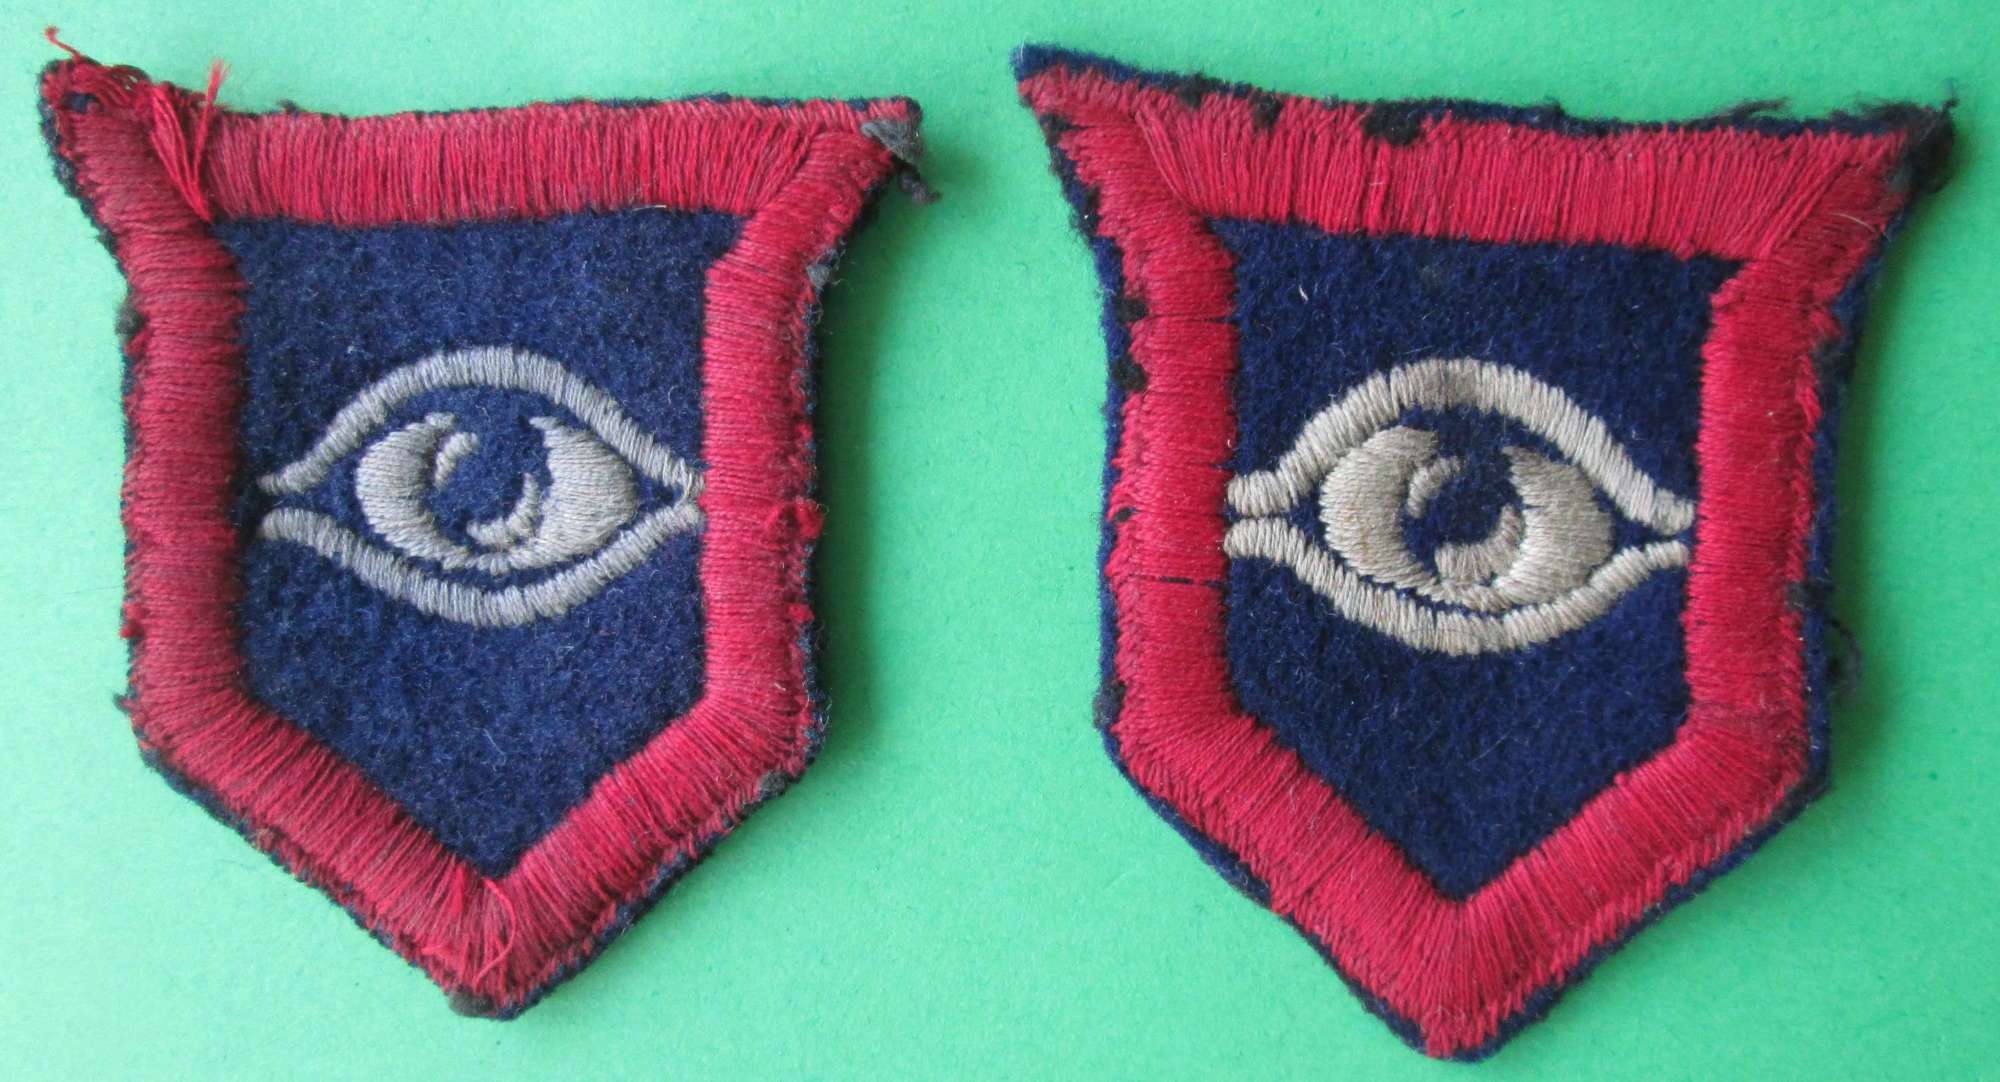 A PAIR OF GUARDS ARMOURED DIVISION FORMATION SIGNS